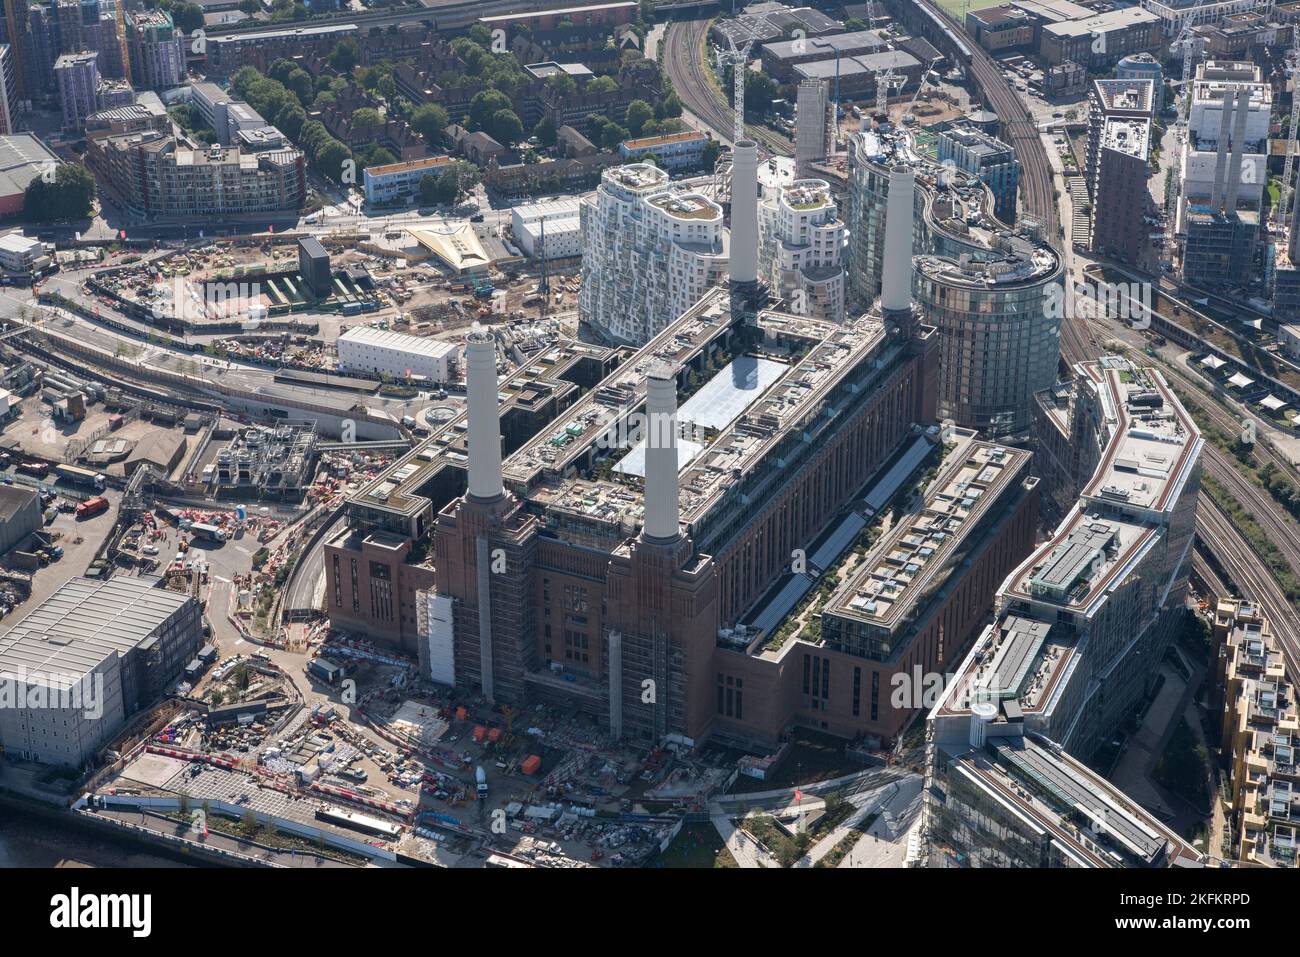 The former Battersea Power Station undergoing renovations, Nine Elms, Greater London Authority, 2021. Stock Photo